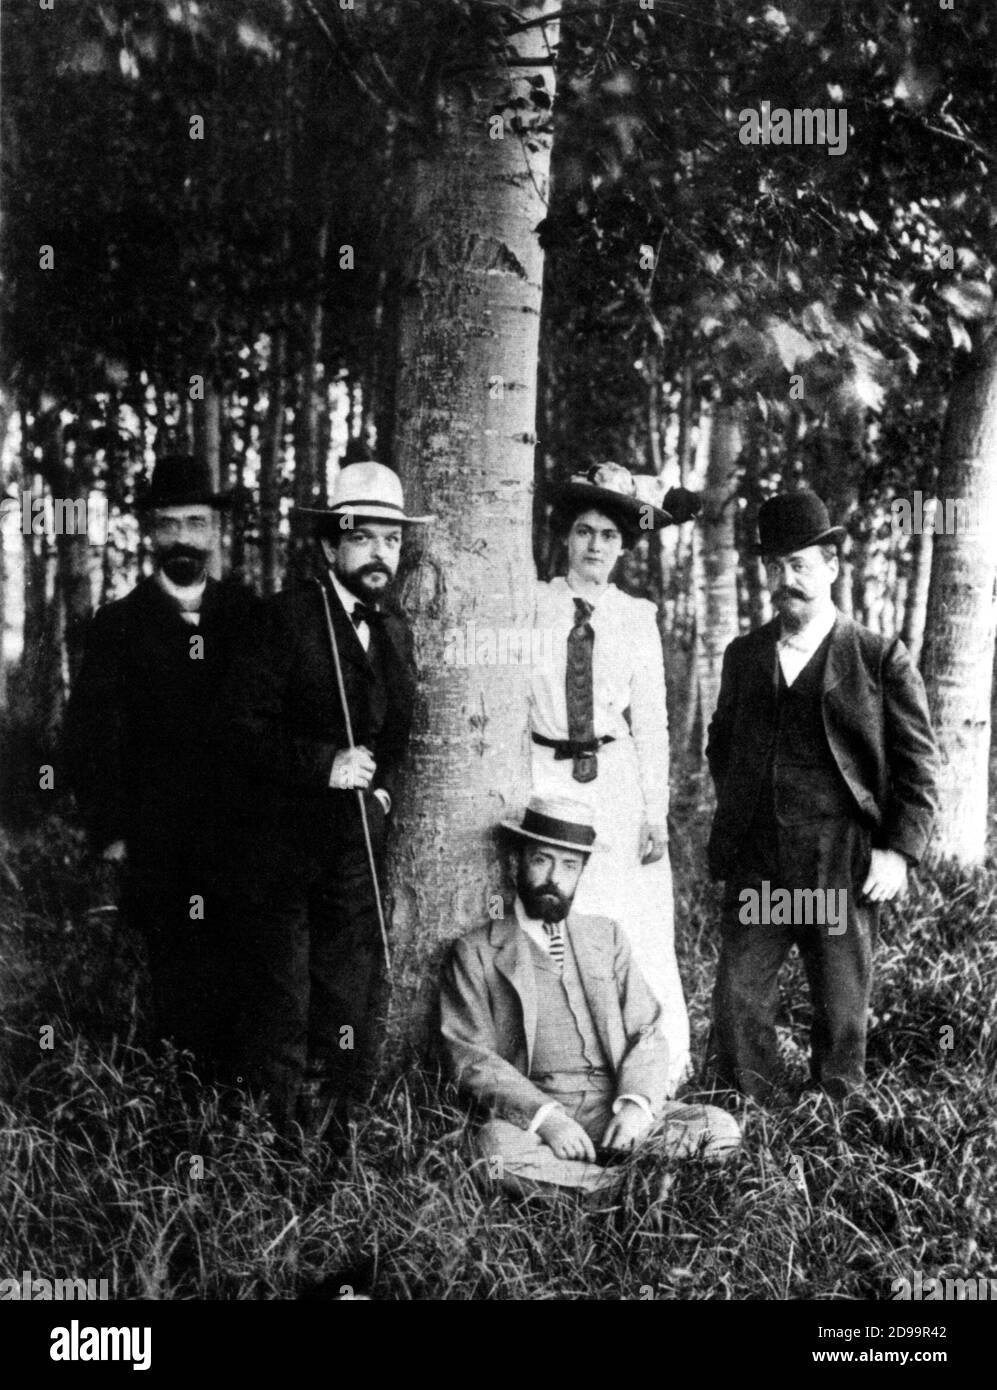 1902 , Eragny , FRANCE : The french music composer  CLAUDE Achille DEBUSSY ( 1862 - 1918 ) - ( in the photo the man with white hat and cane ) with the wife Lilly ( Rosalie Textier , mannequin for the Sisters Callot , married debussy in 1902 )  , the composer PAUL  DUKAS  ( Paris 1865 - 1935 ) and Pierre Laloy - MUSICISTA - COMPOSITORE - MUSICA CLASSICA - IMPRESSIONISMO - IMPRESSIONISM - impressionista - impressionist -  balletto - ballet - hat - cappello - cane - bastone - tie - cravatta - bosco - wood - albero - tree  ----  Archivio GBB Stock Photo